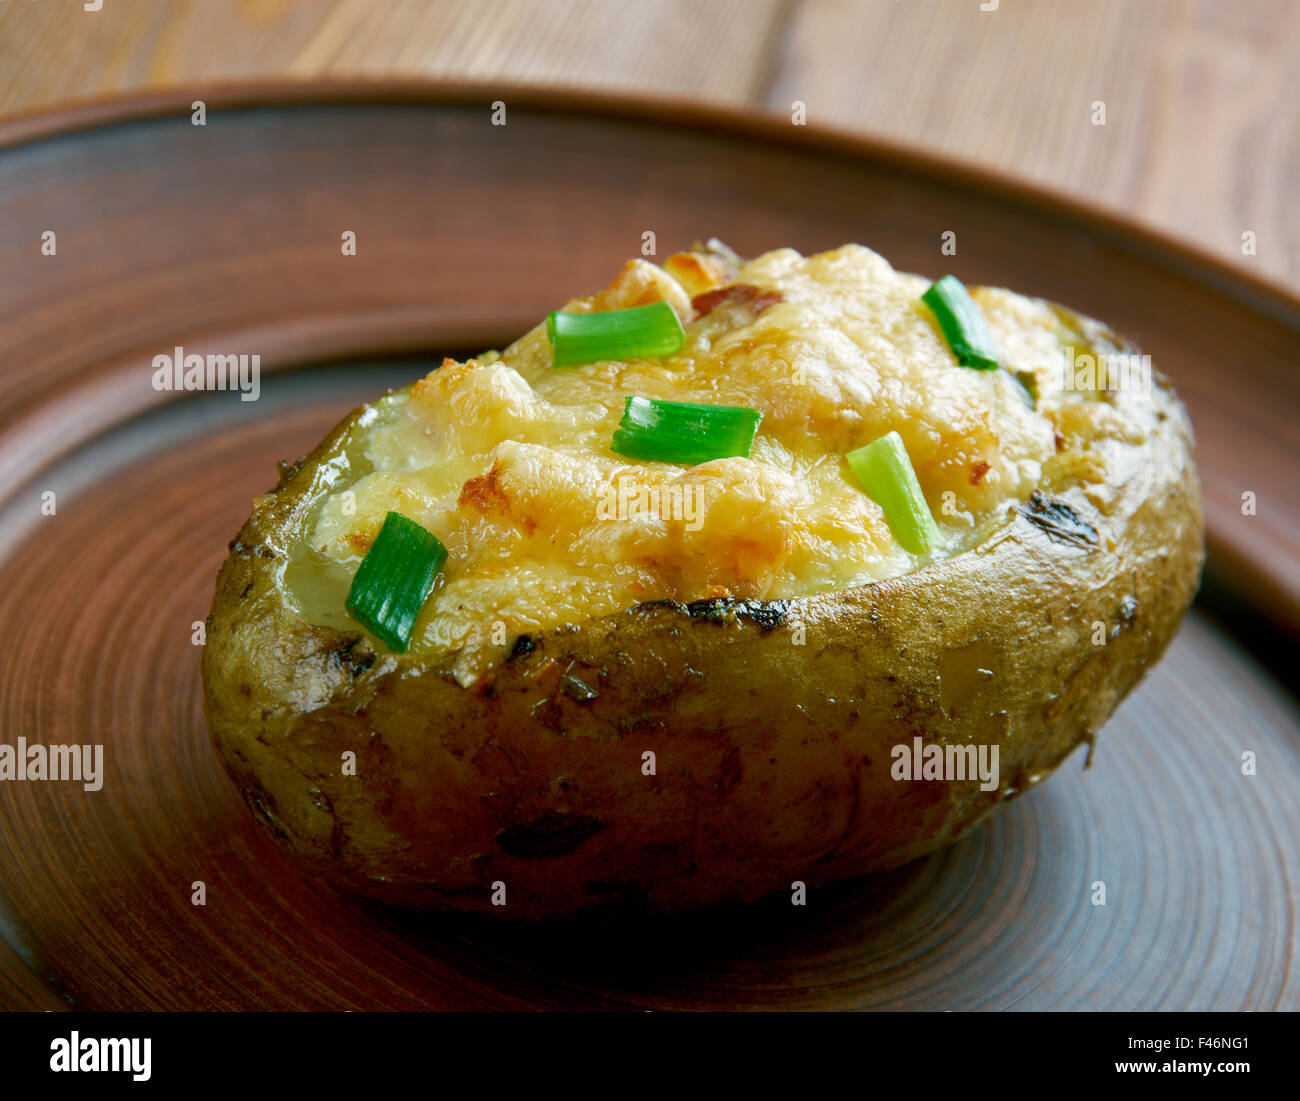 Kumpir -  baked potato with various fillings, is a popular fast food in Turkey Stock Photo